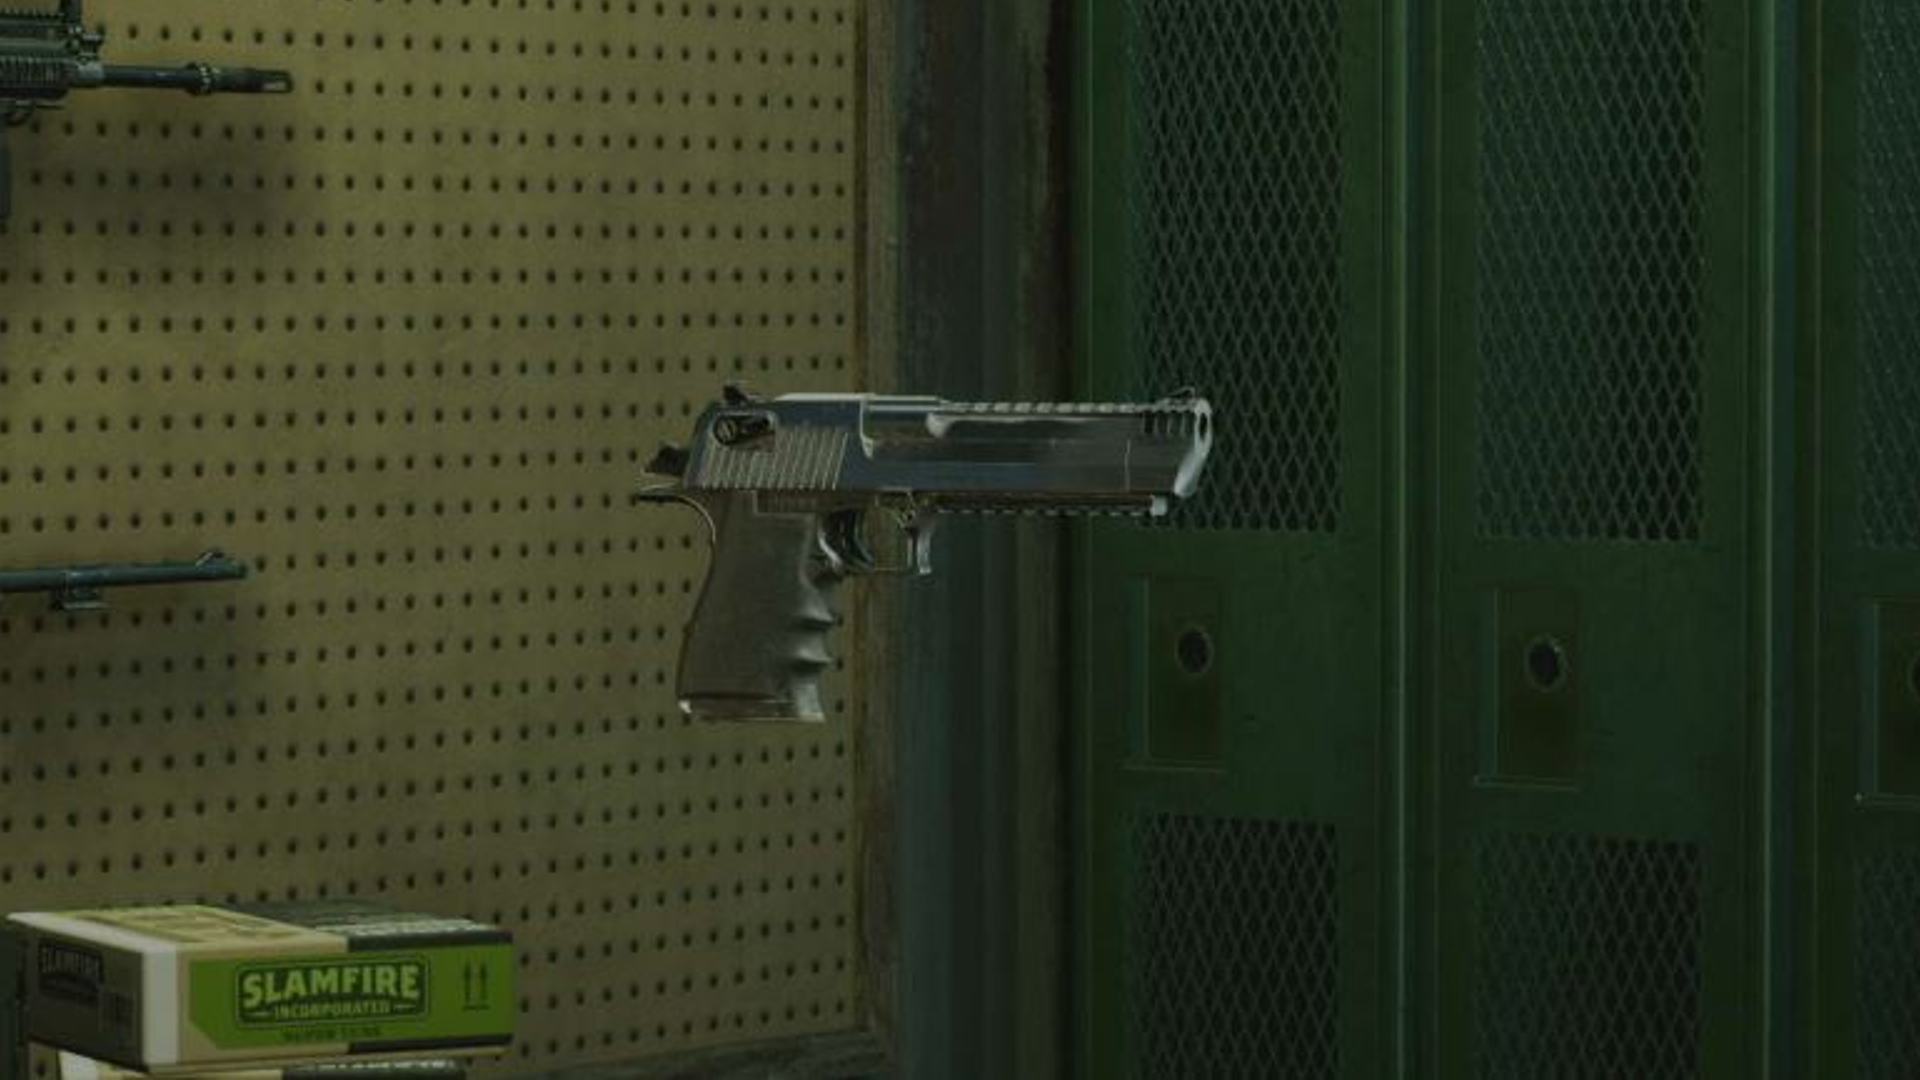 Back 4 Blood Best Weapons: A shot of the Desert Eagle weapon in the menu.